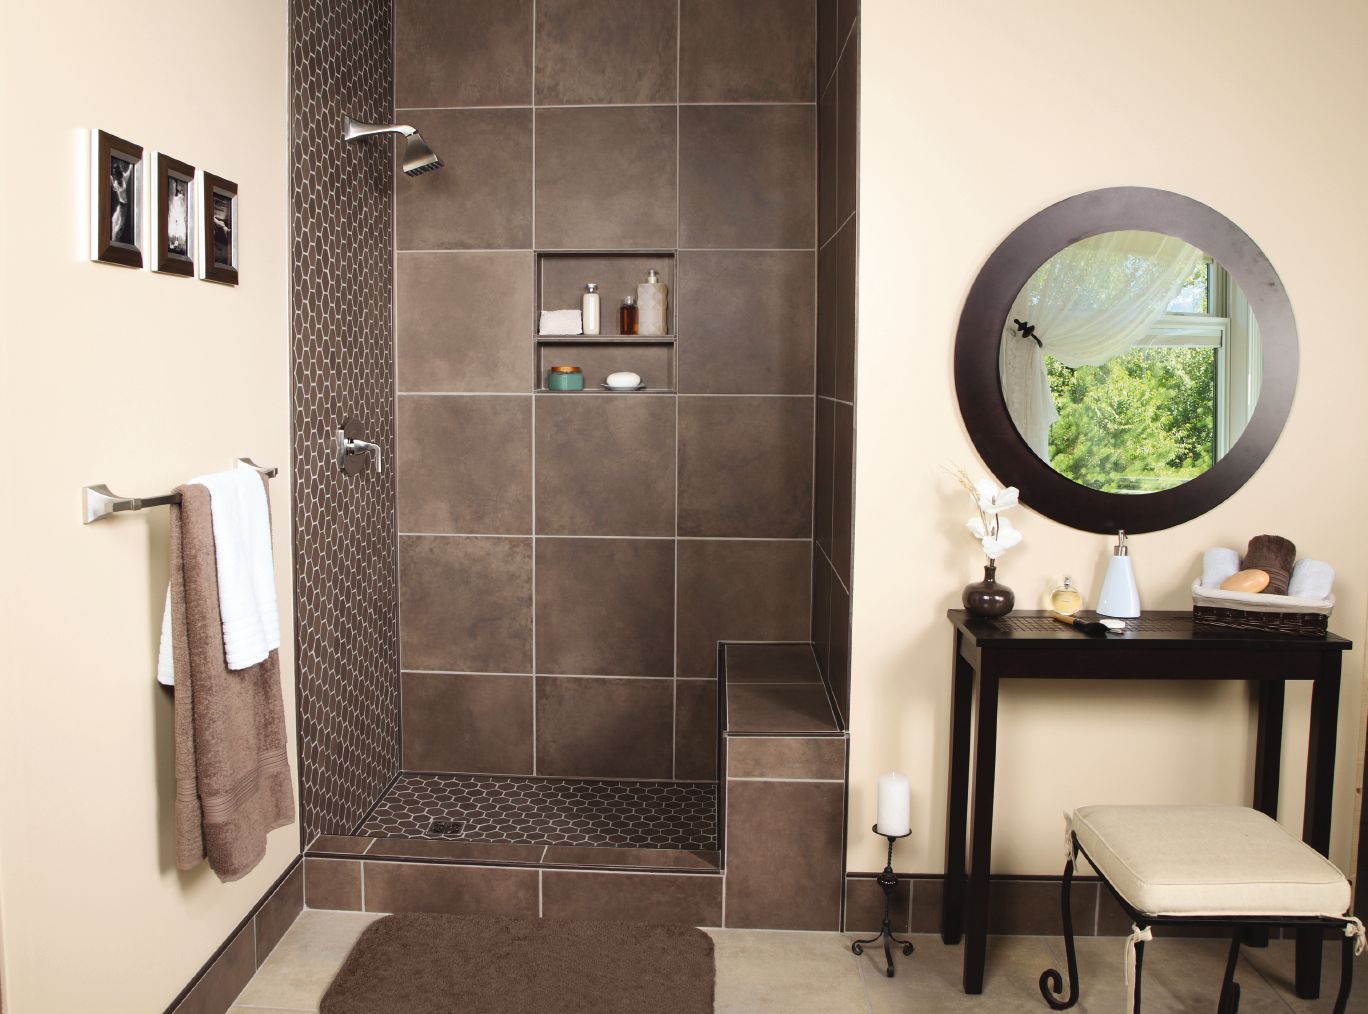 Tile Shower Accessories  Choose the Best Shower Accessories